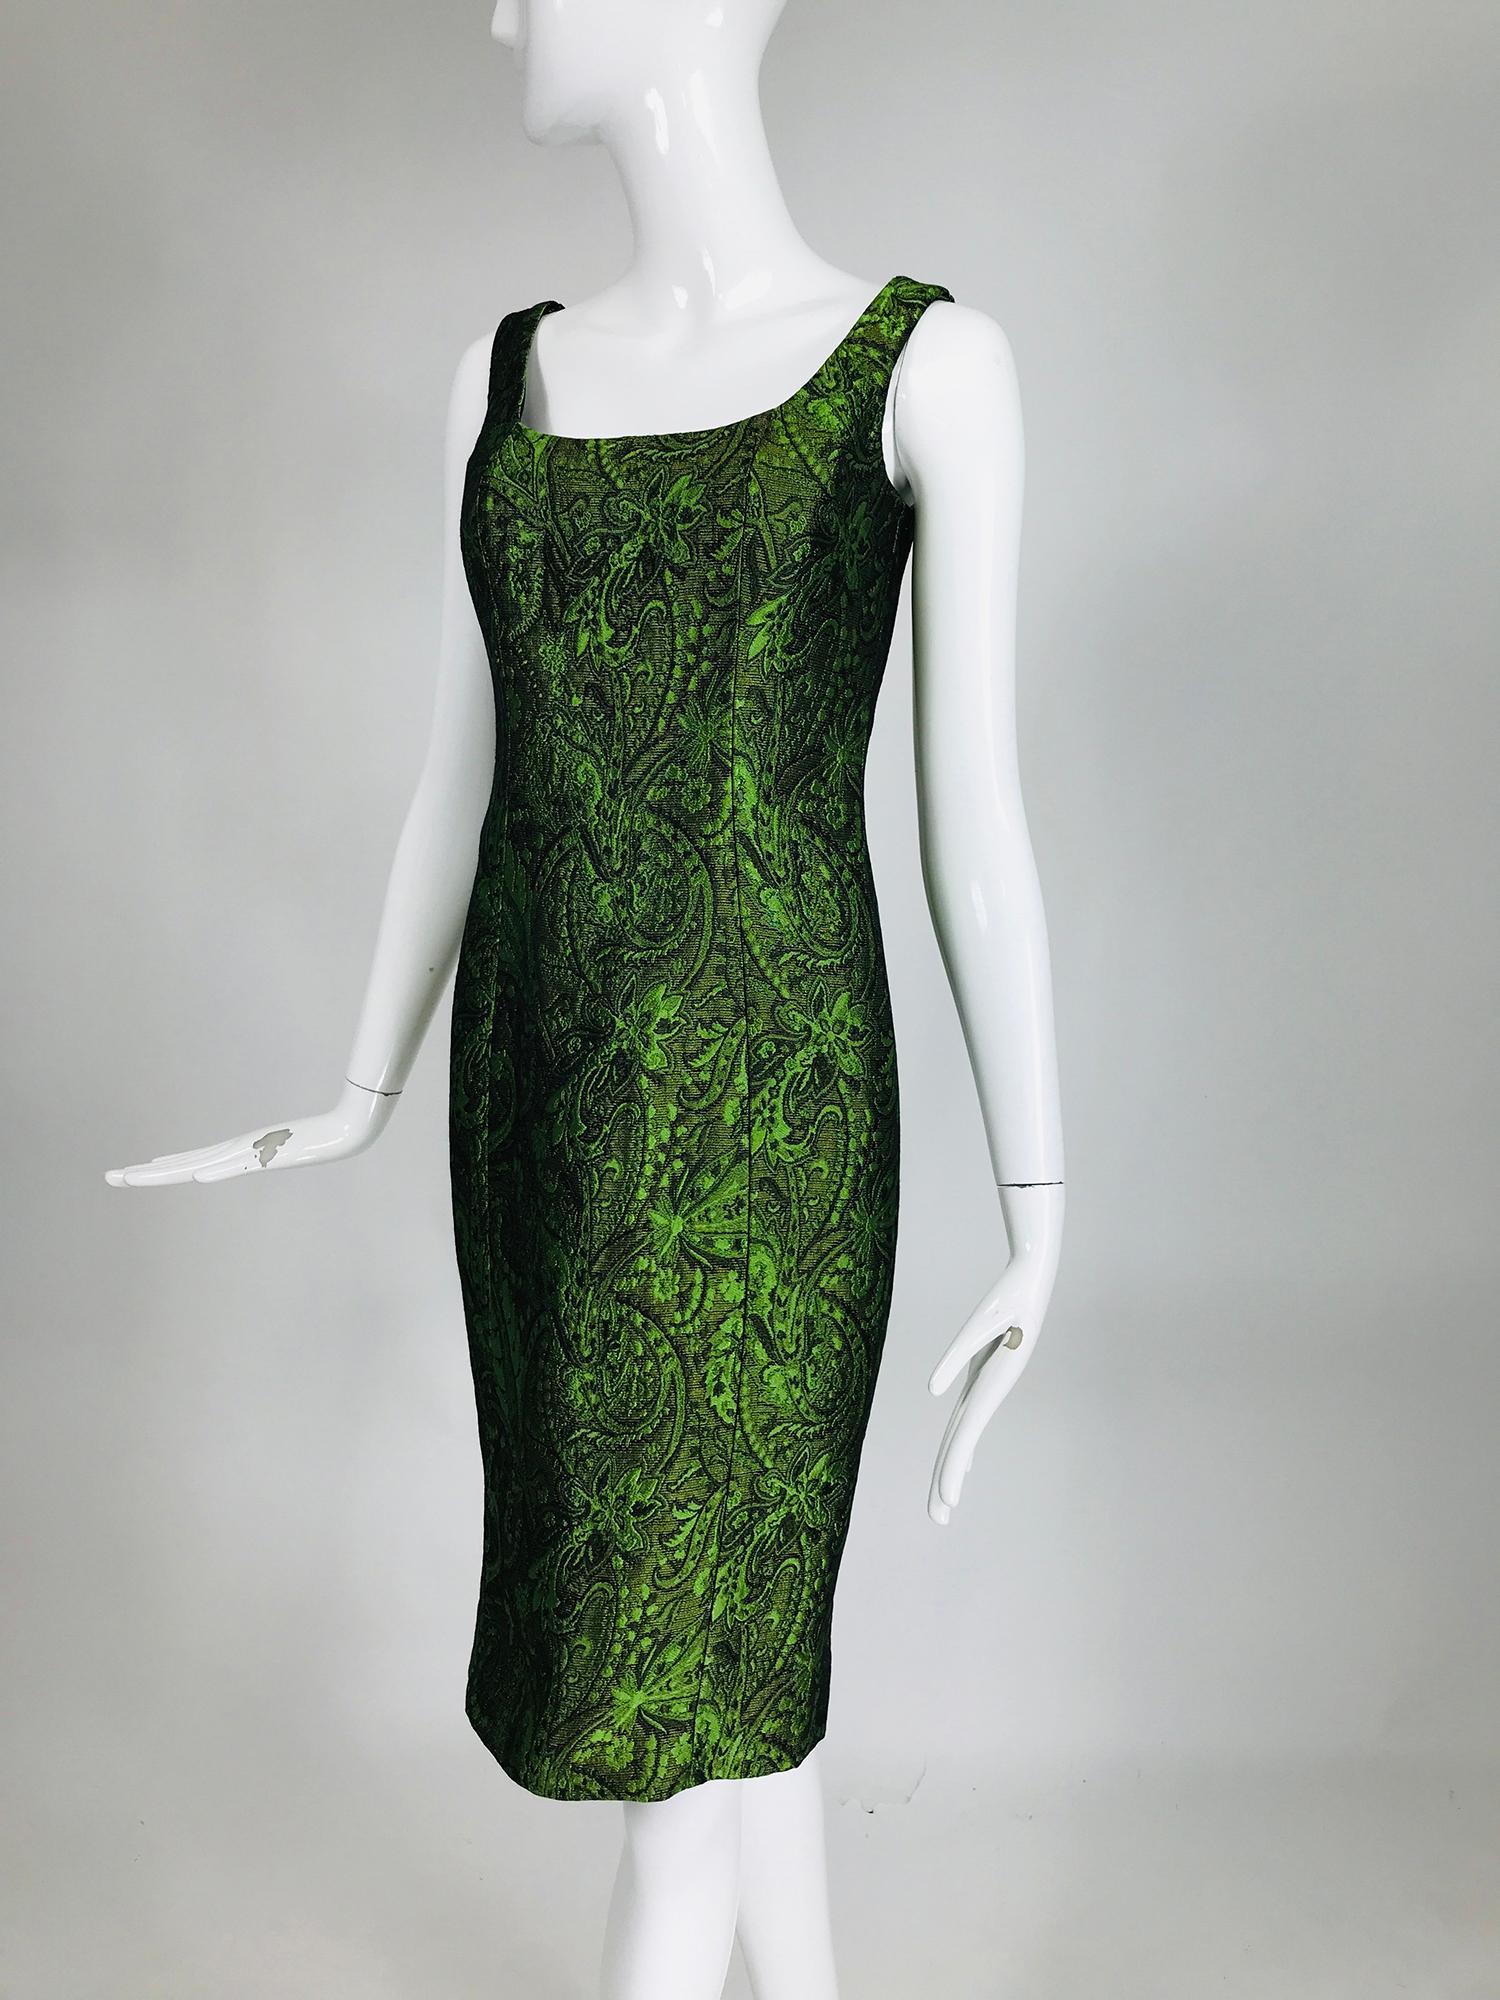 Escada Couture, moss green silk/wool brocade sheath dress. Low scoop neckline, princess seam dress is fitted through the body and tapers to the hem. Beautiful iridescent green brocade with lush dimension. The dress is fully lined in black, the